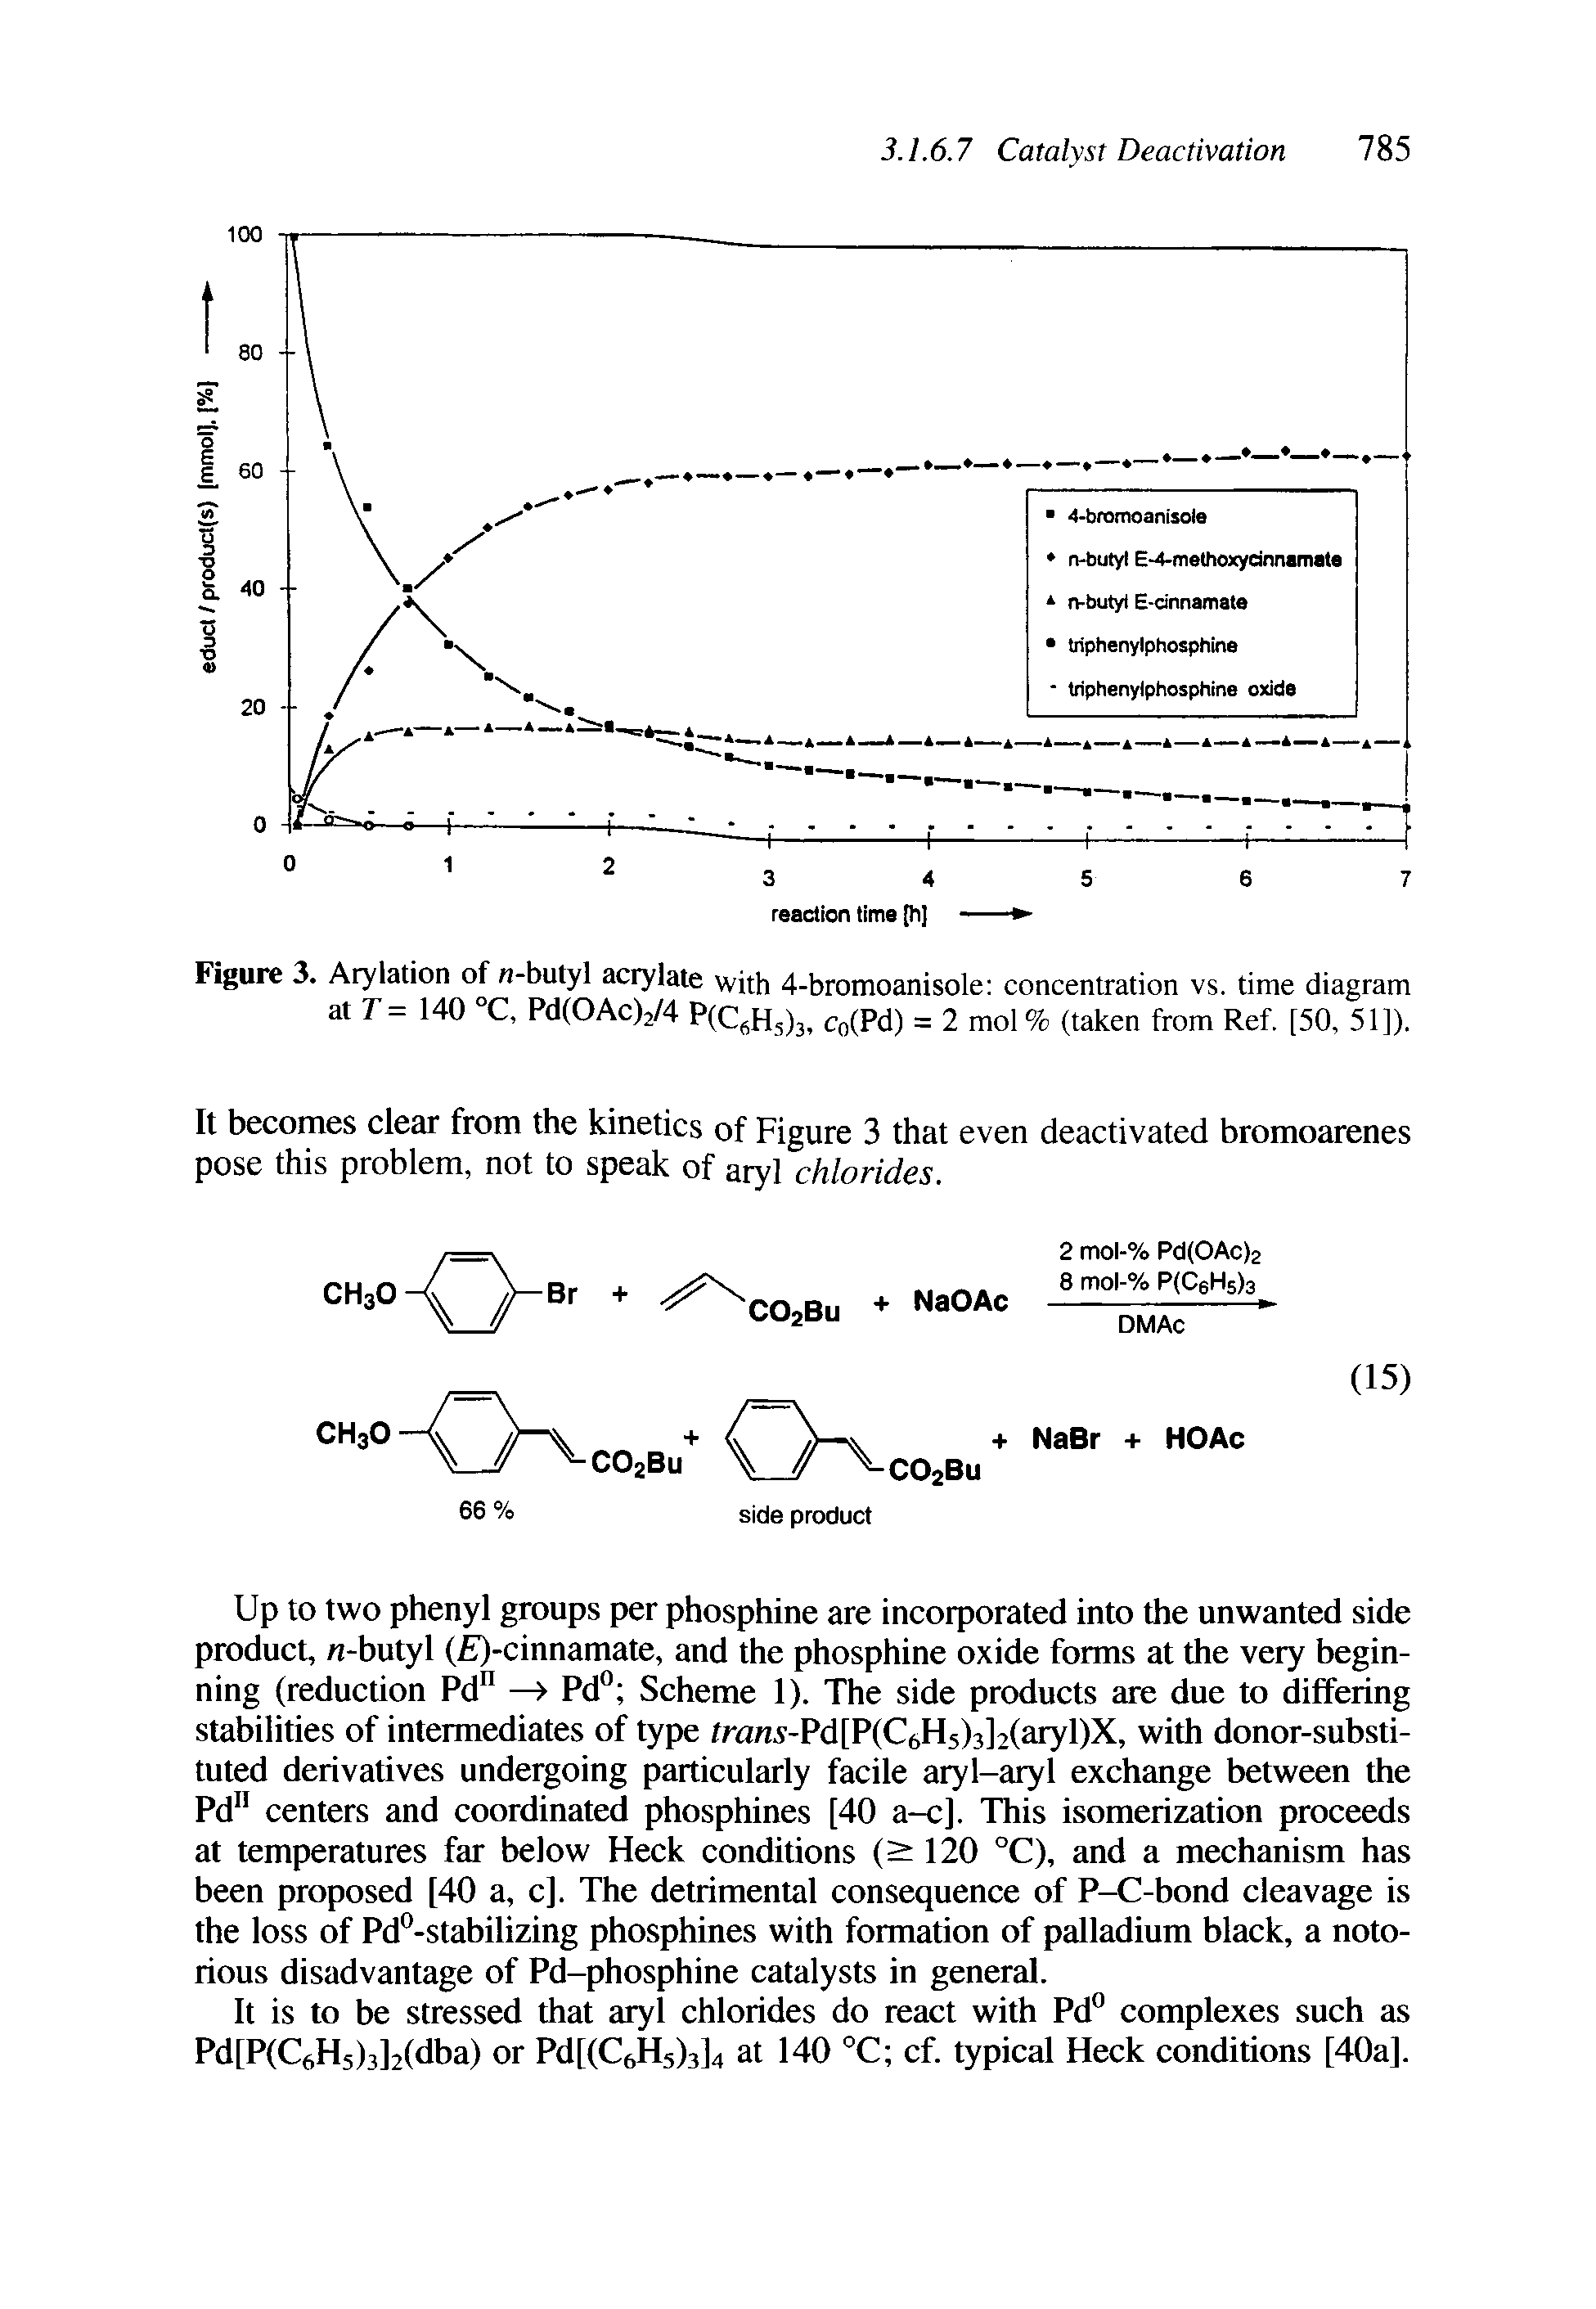 Figure 3. Arylation of n-butyl acrylate with 4-bromoanisole concentration vs. time diagram at r= 140 °C, Pd(OAc)2/4 Co(Pd) = 2 mol % (taken from Ref. [50, 51]).